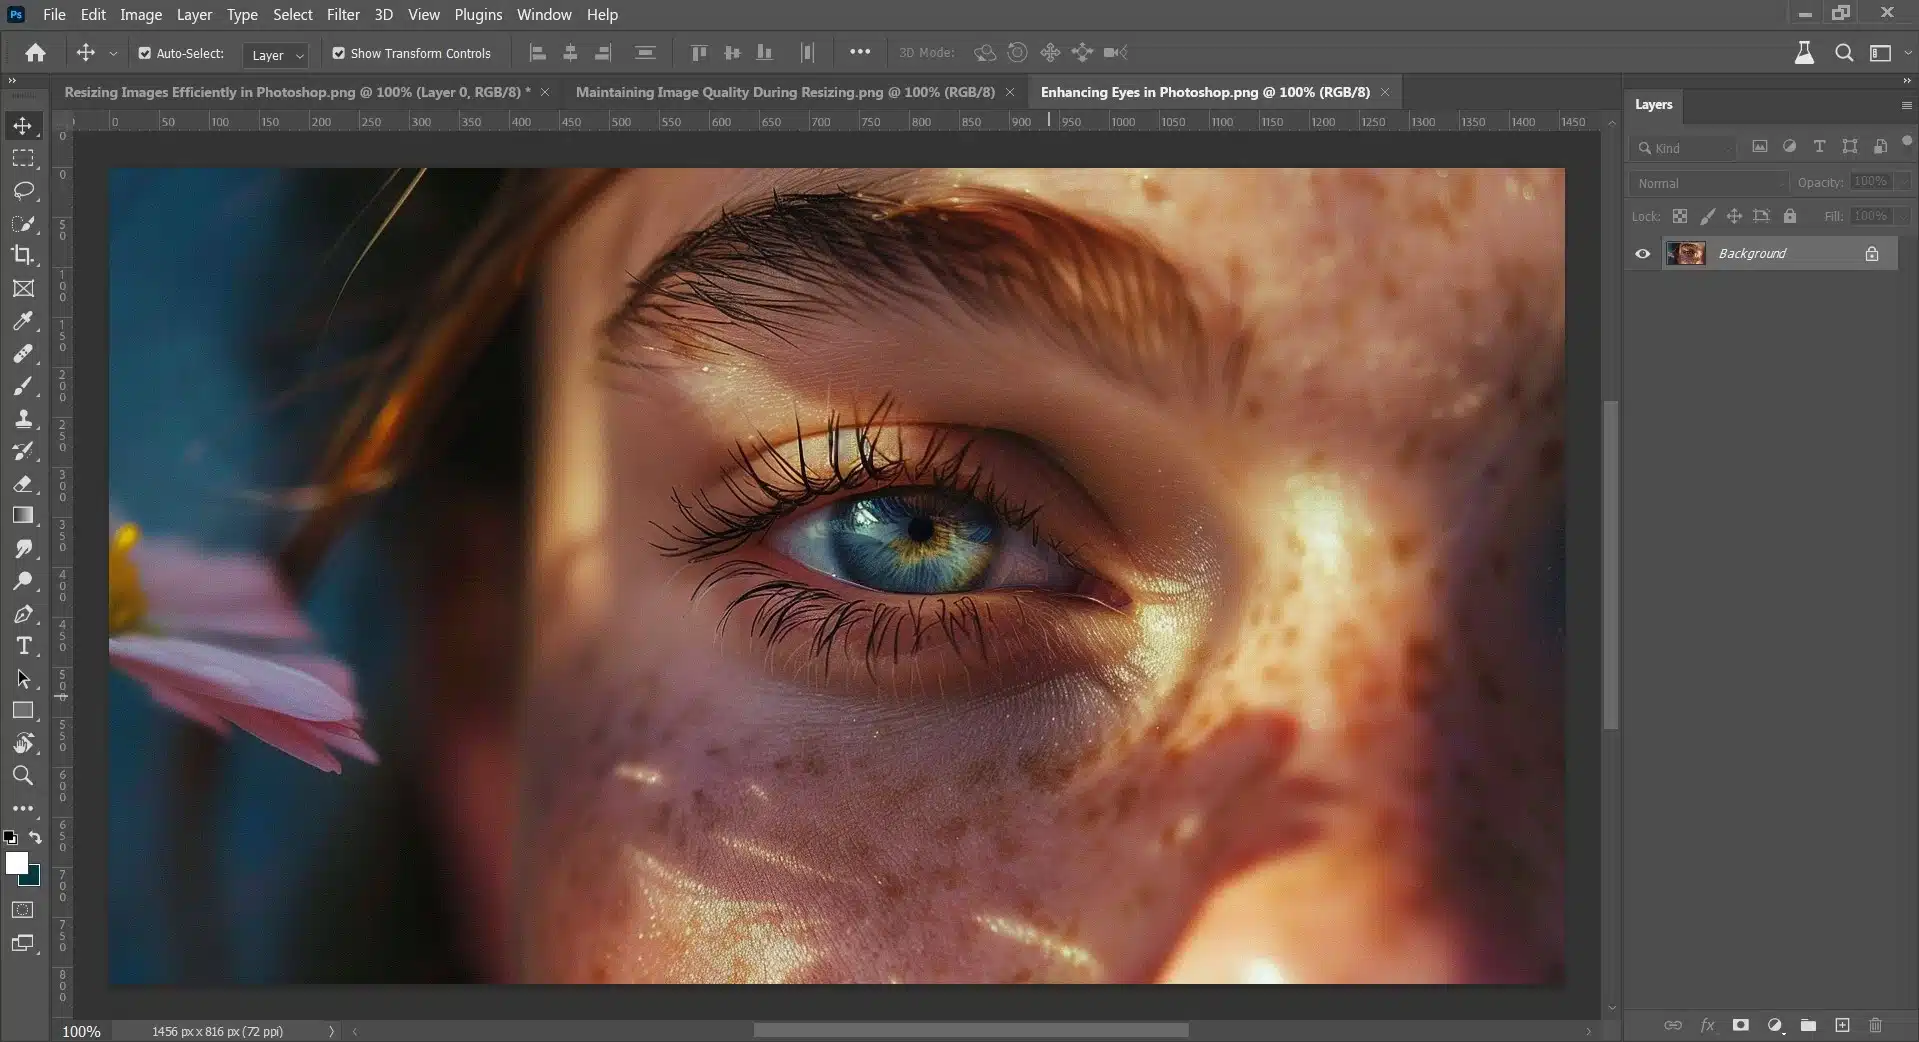 Close-up of a woman's eye with Photoshop tools visible, showing adjustments for brightness and color enhancement.